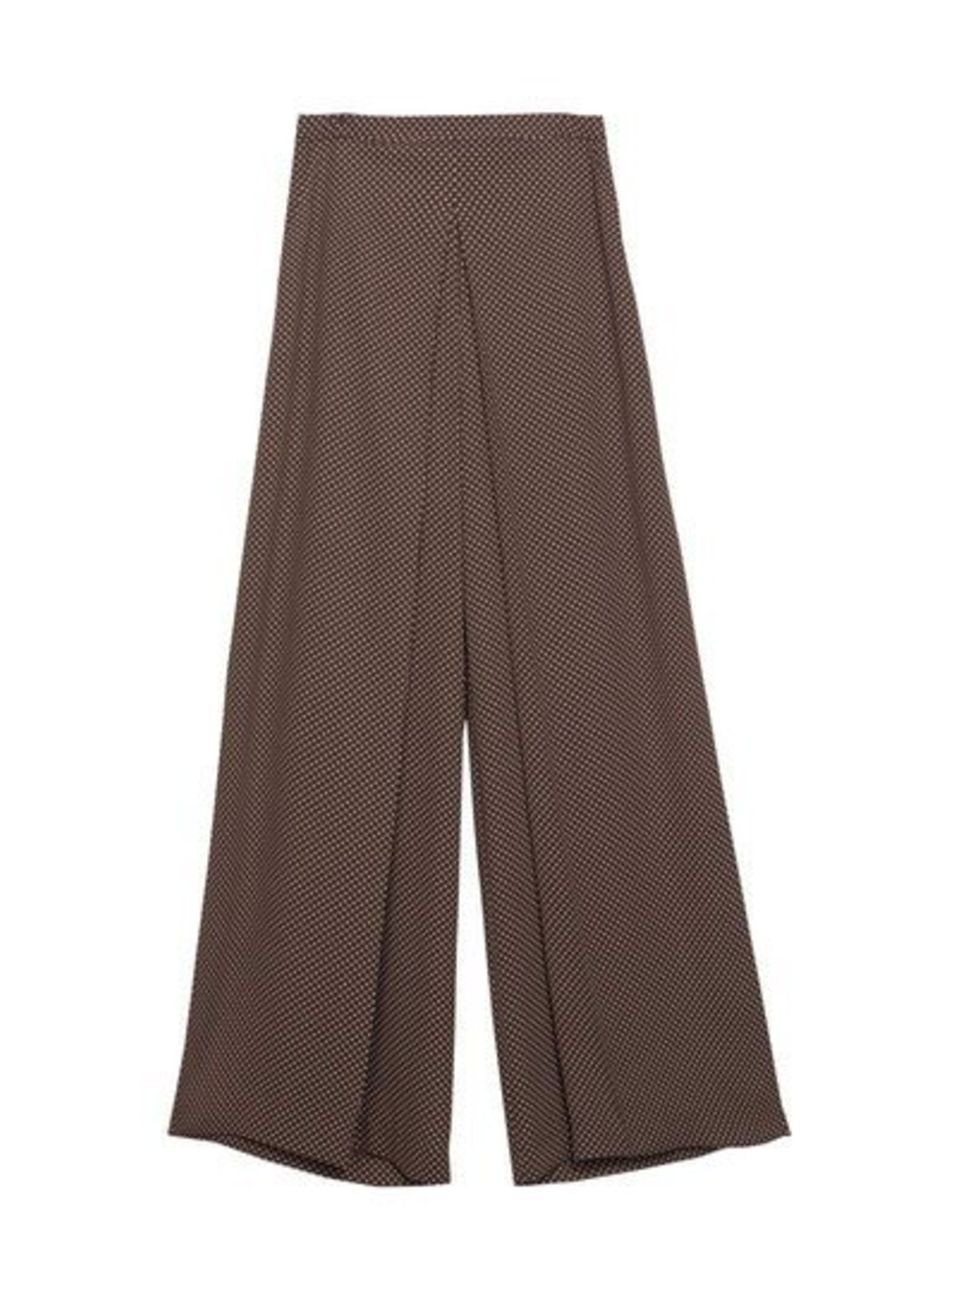 Pair wide-leg trousers with a cropped knit.

Zara trousers, £29.99